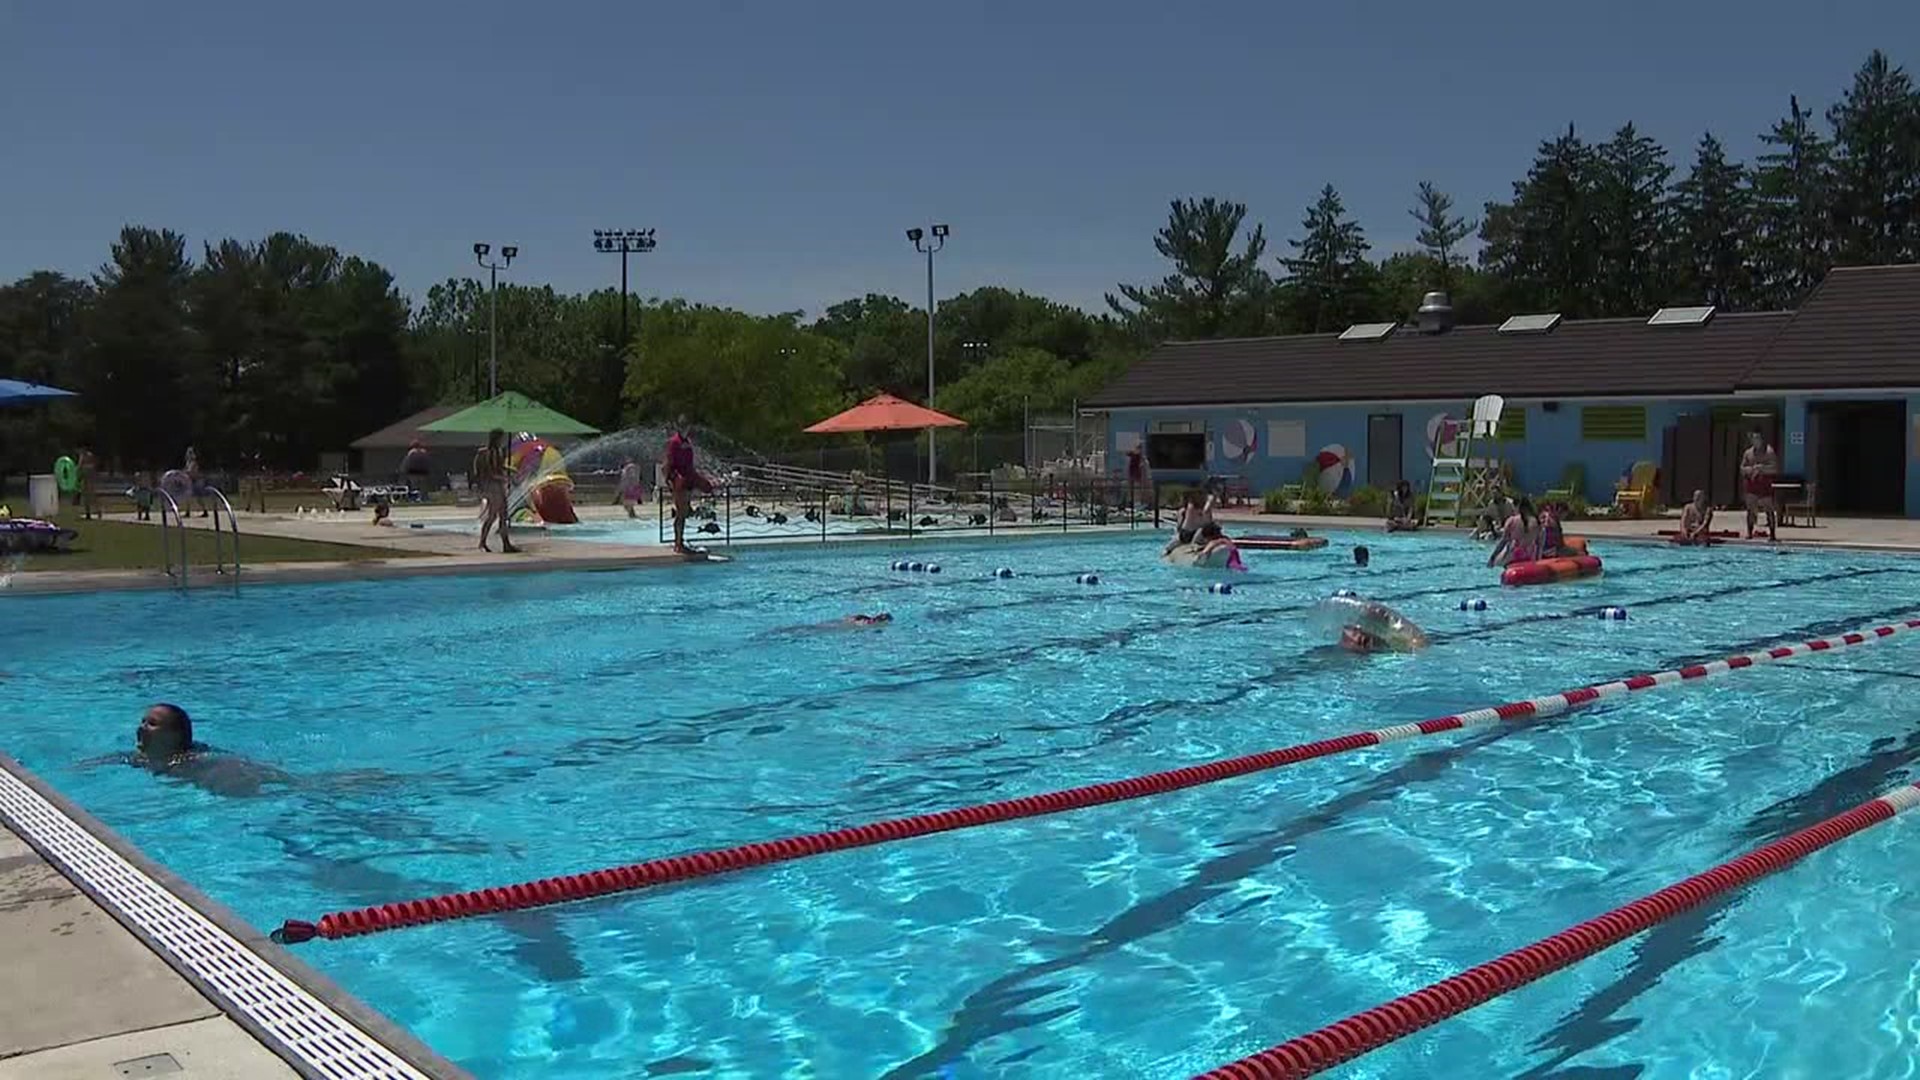 Swimming pools are allowed to open in the yellow and green phases of the state's reopening plan, but there are some new safety precautions in place.